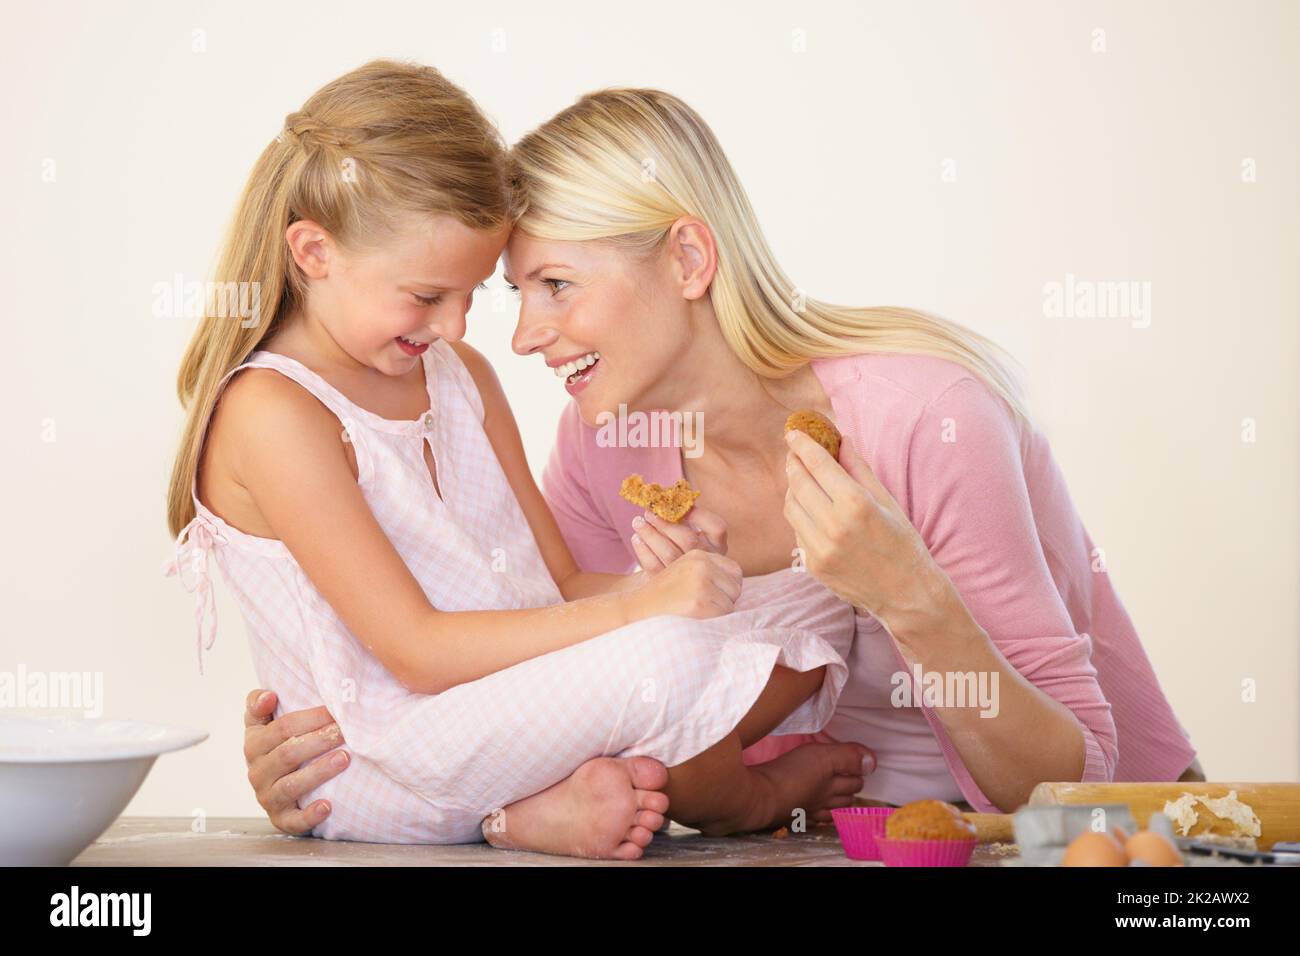 Cherishing every moment with her. A mother and daughter eating muffins after baking and bonding. Stock Photo